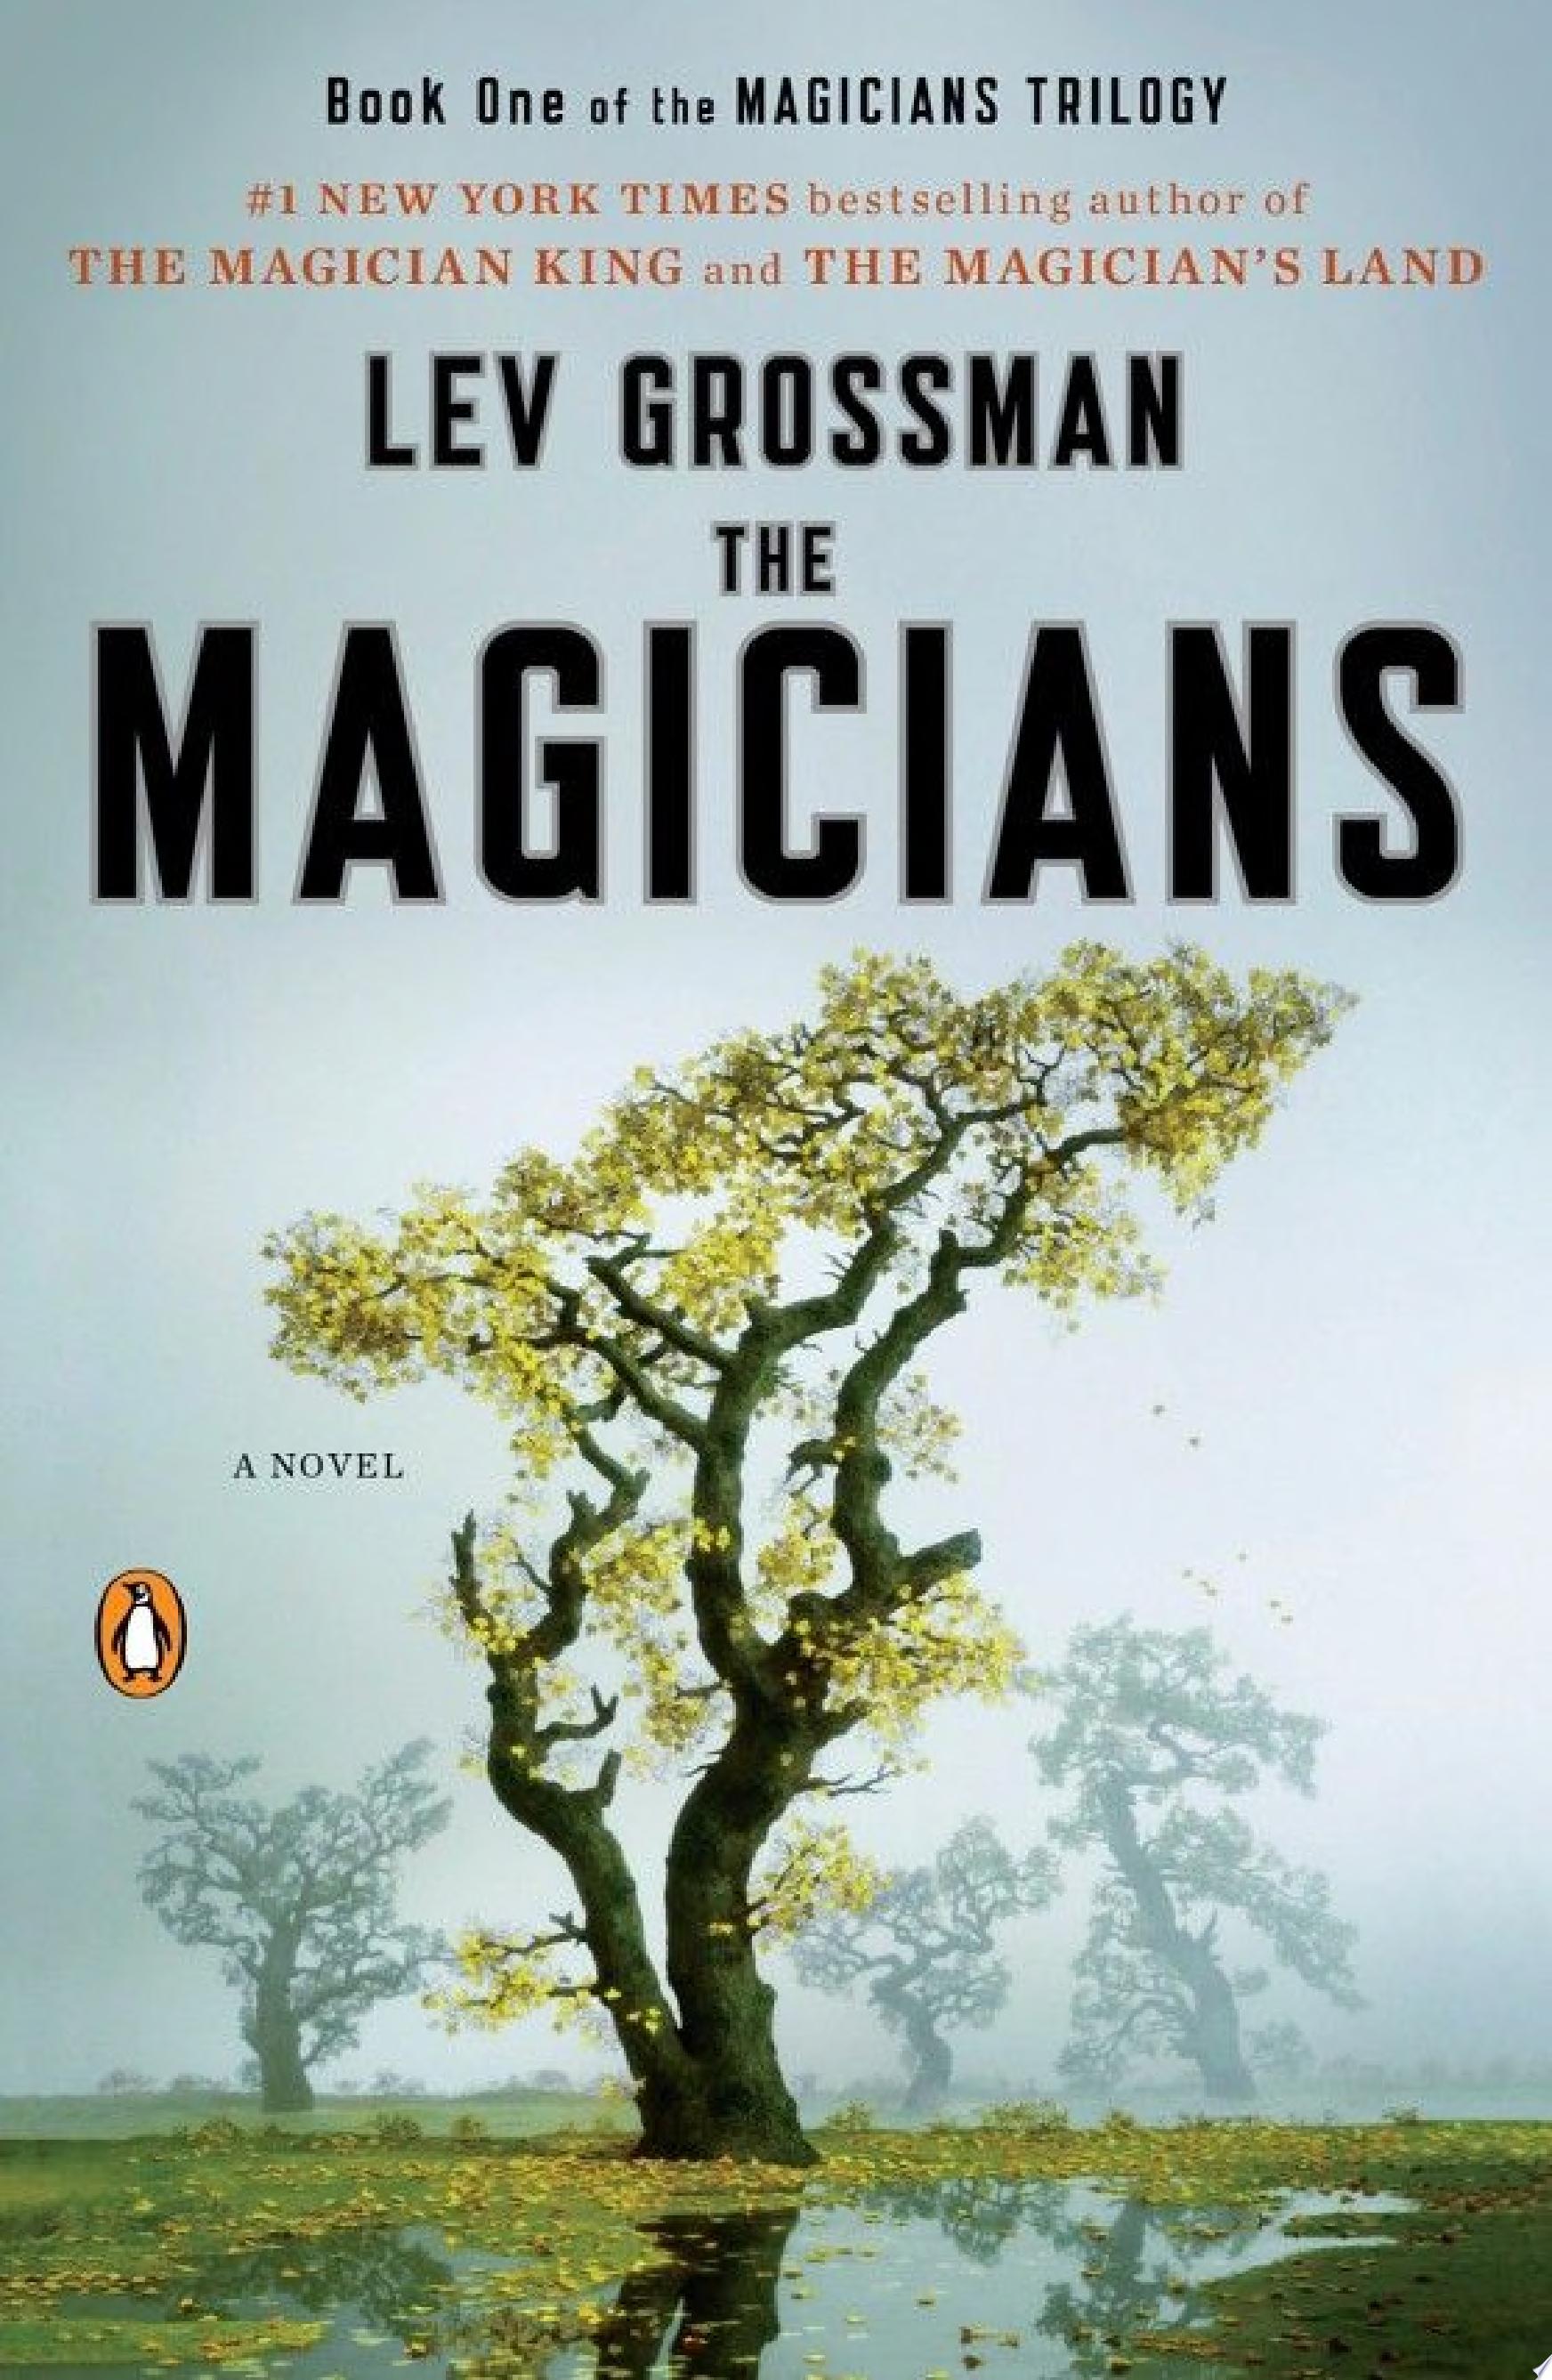 Image for "The Magicians"